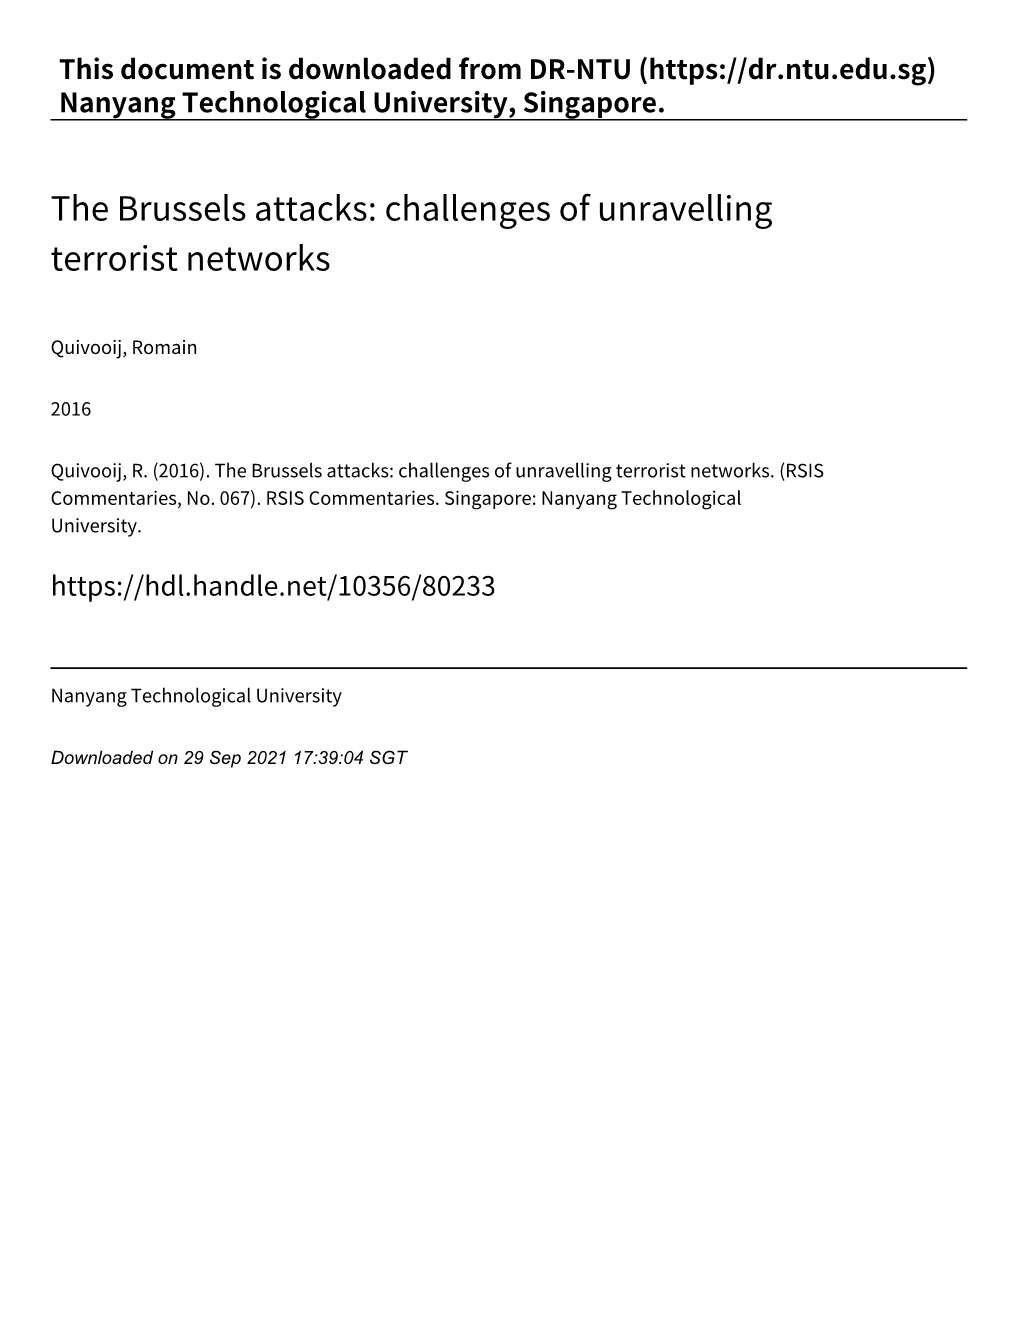 The Brussels Attacks: Challenges of Unravelling Terrorist Networks